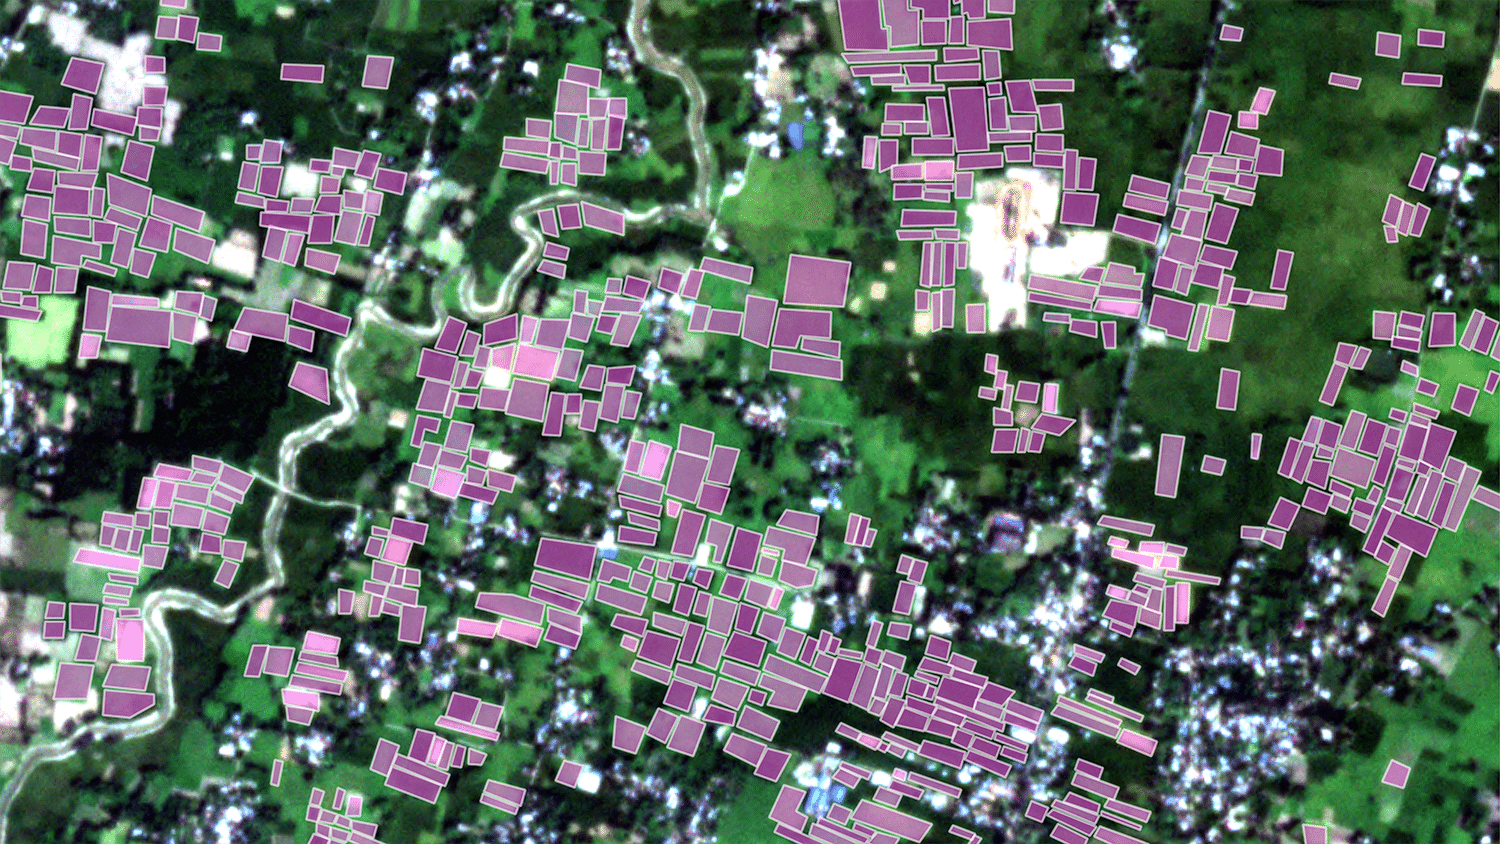 A research image from a student in the Ph.D. in Geospatial Analytics program